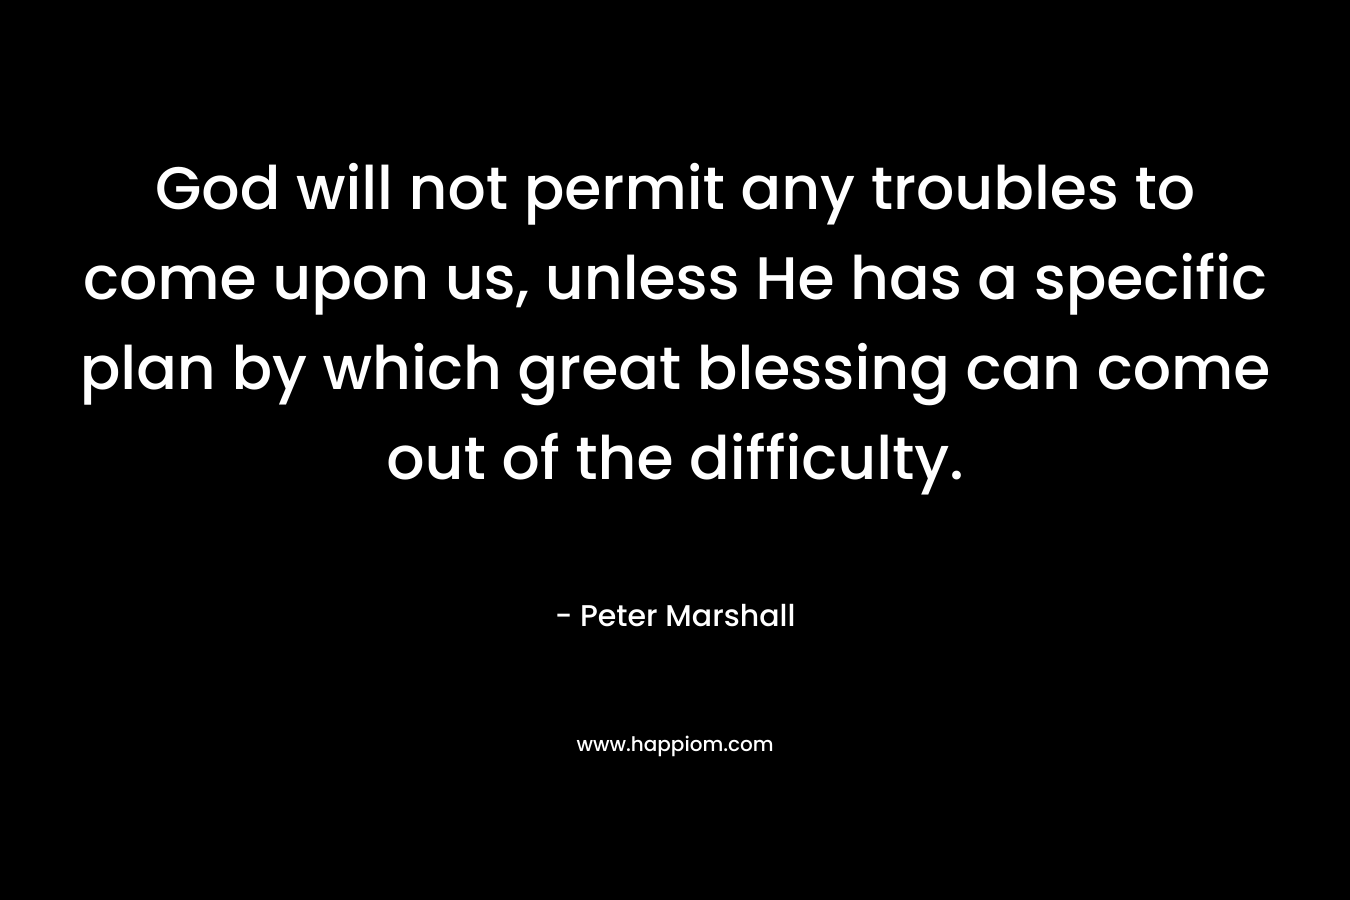 God will not permit any troubles to come upon us, unless He has a specific plan by which great blessing can come out of the difficulty. – Peter Marshall